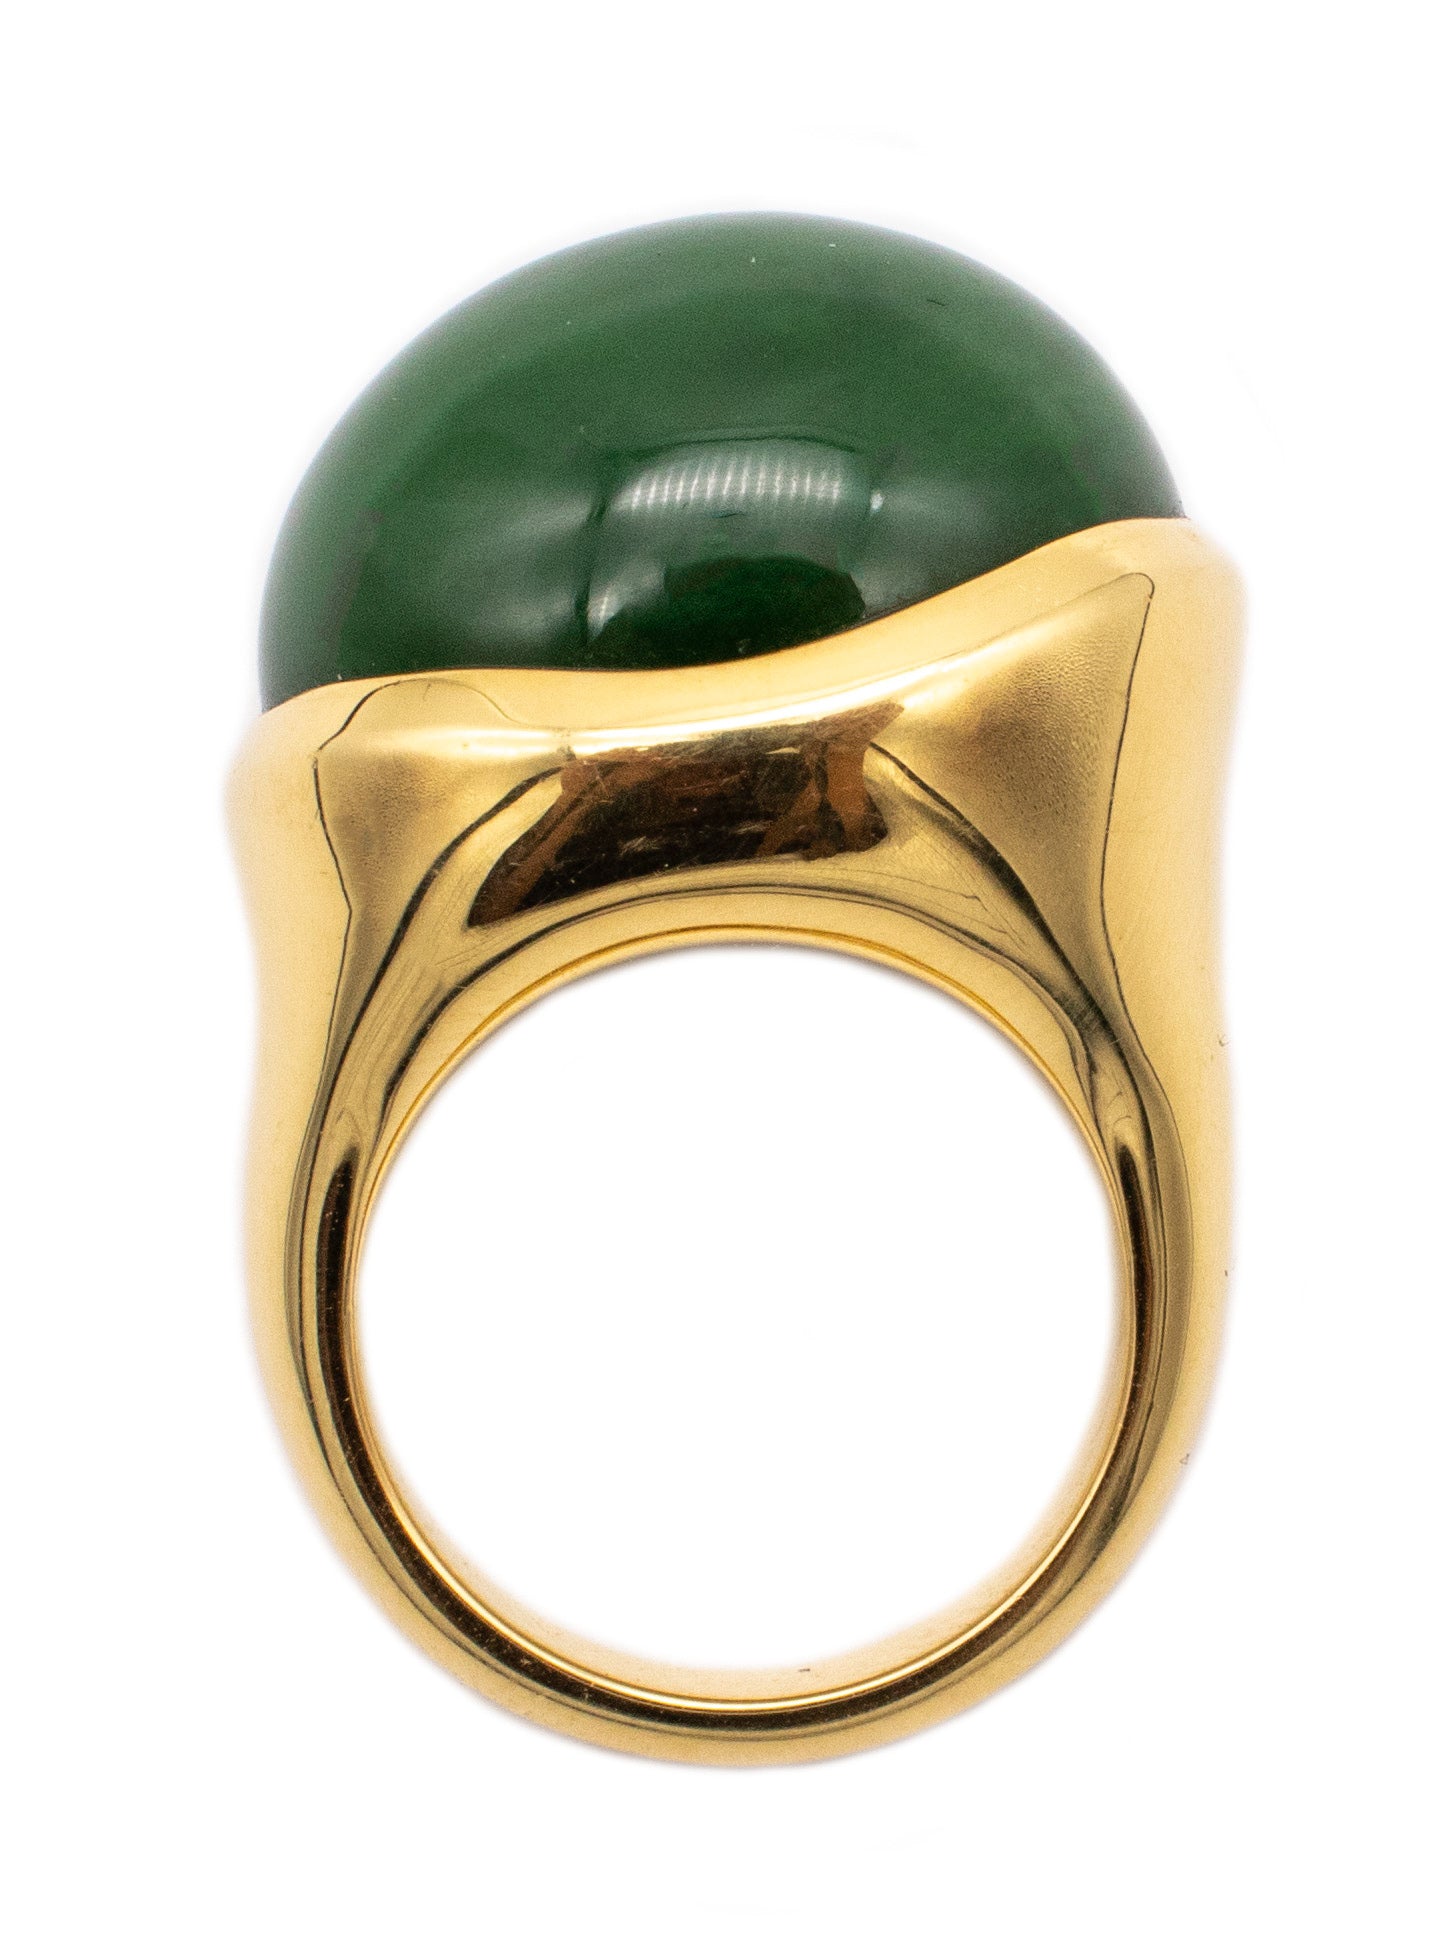 TIFFANY & CO. 1990 BY ELSA PERETTI 18 KT GOLD RING WITH GREEN JADEITE JADE